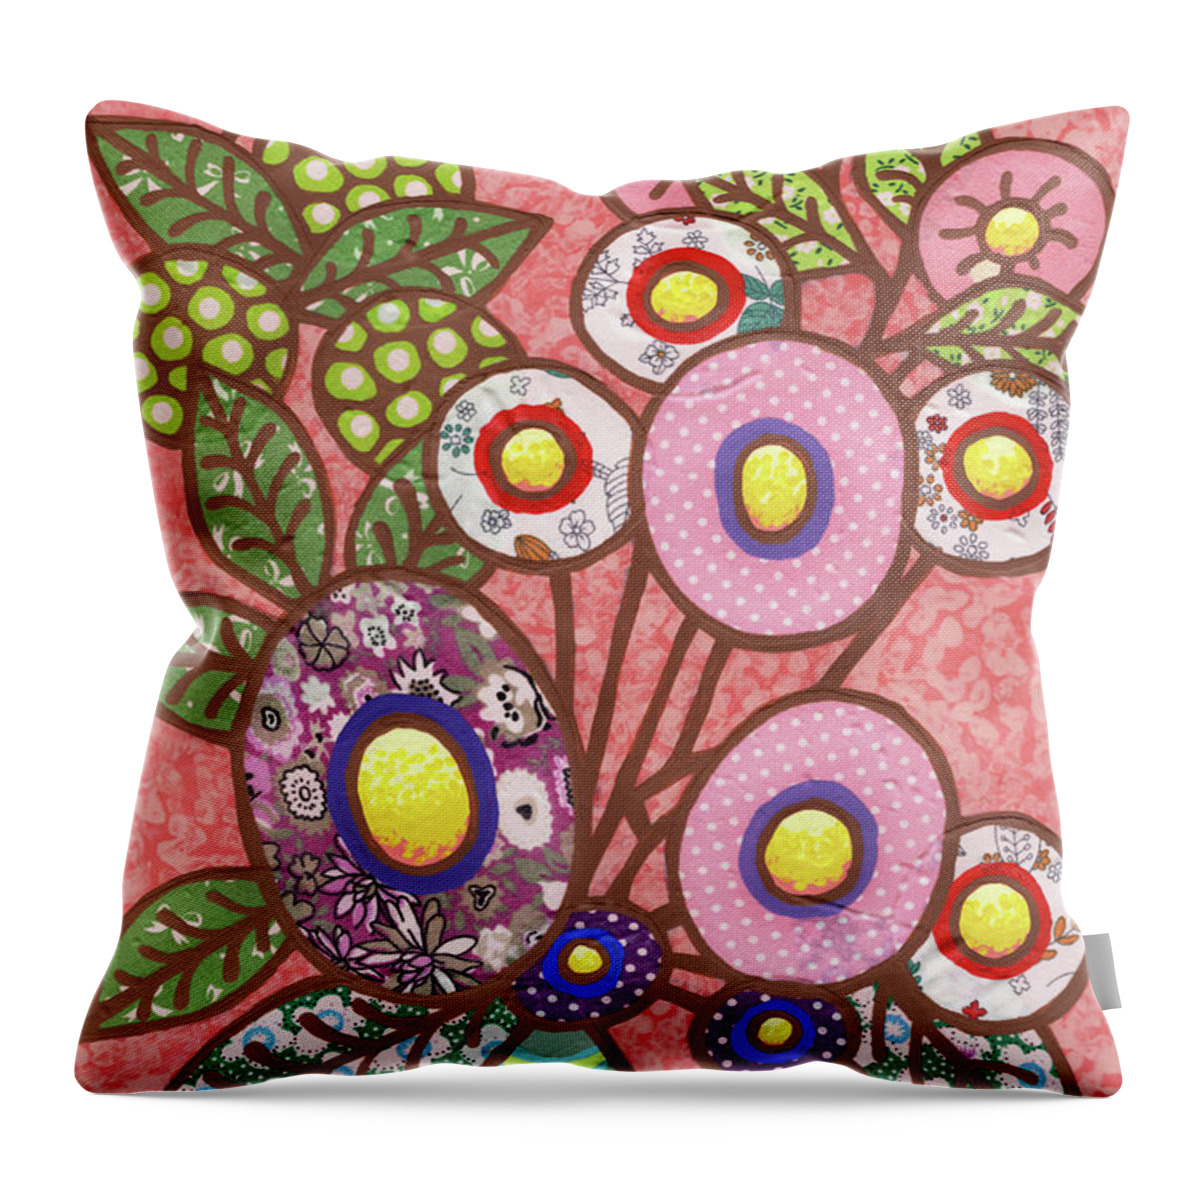 Flowers In A Vase Throw Pillow featuring the painting Perfect In Pink Bouquet by Amy E Fraser